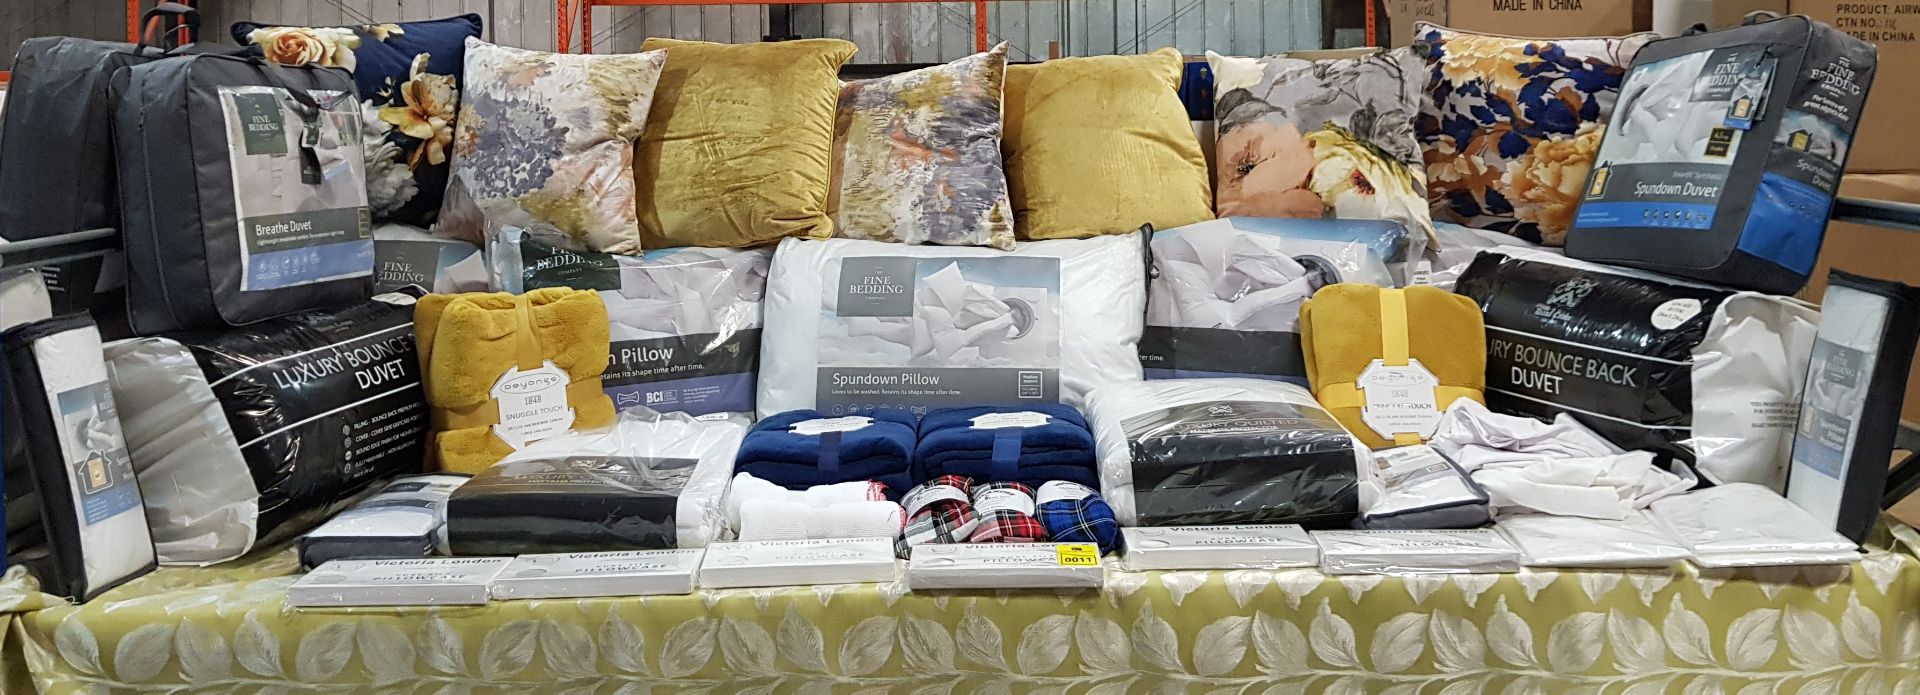 30+ BRAND NEW MIXED BEDDING LOT THIS INCLUDES LUXURY BOUNCE BACK DUVET'S SIZE KING SIZE 230 X